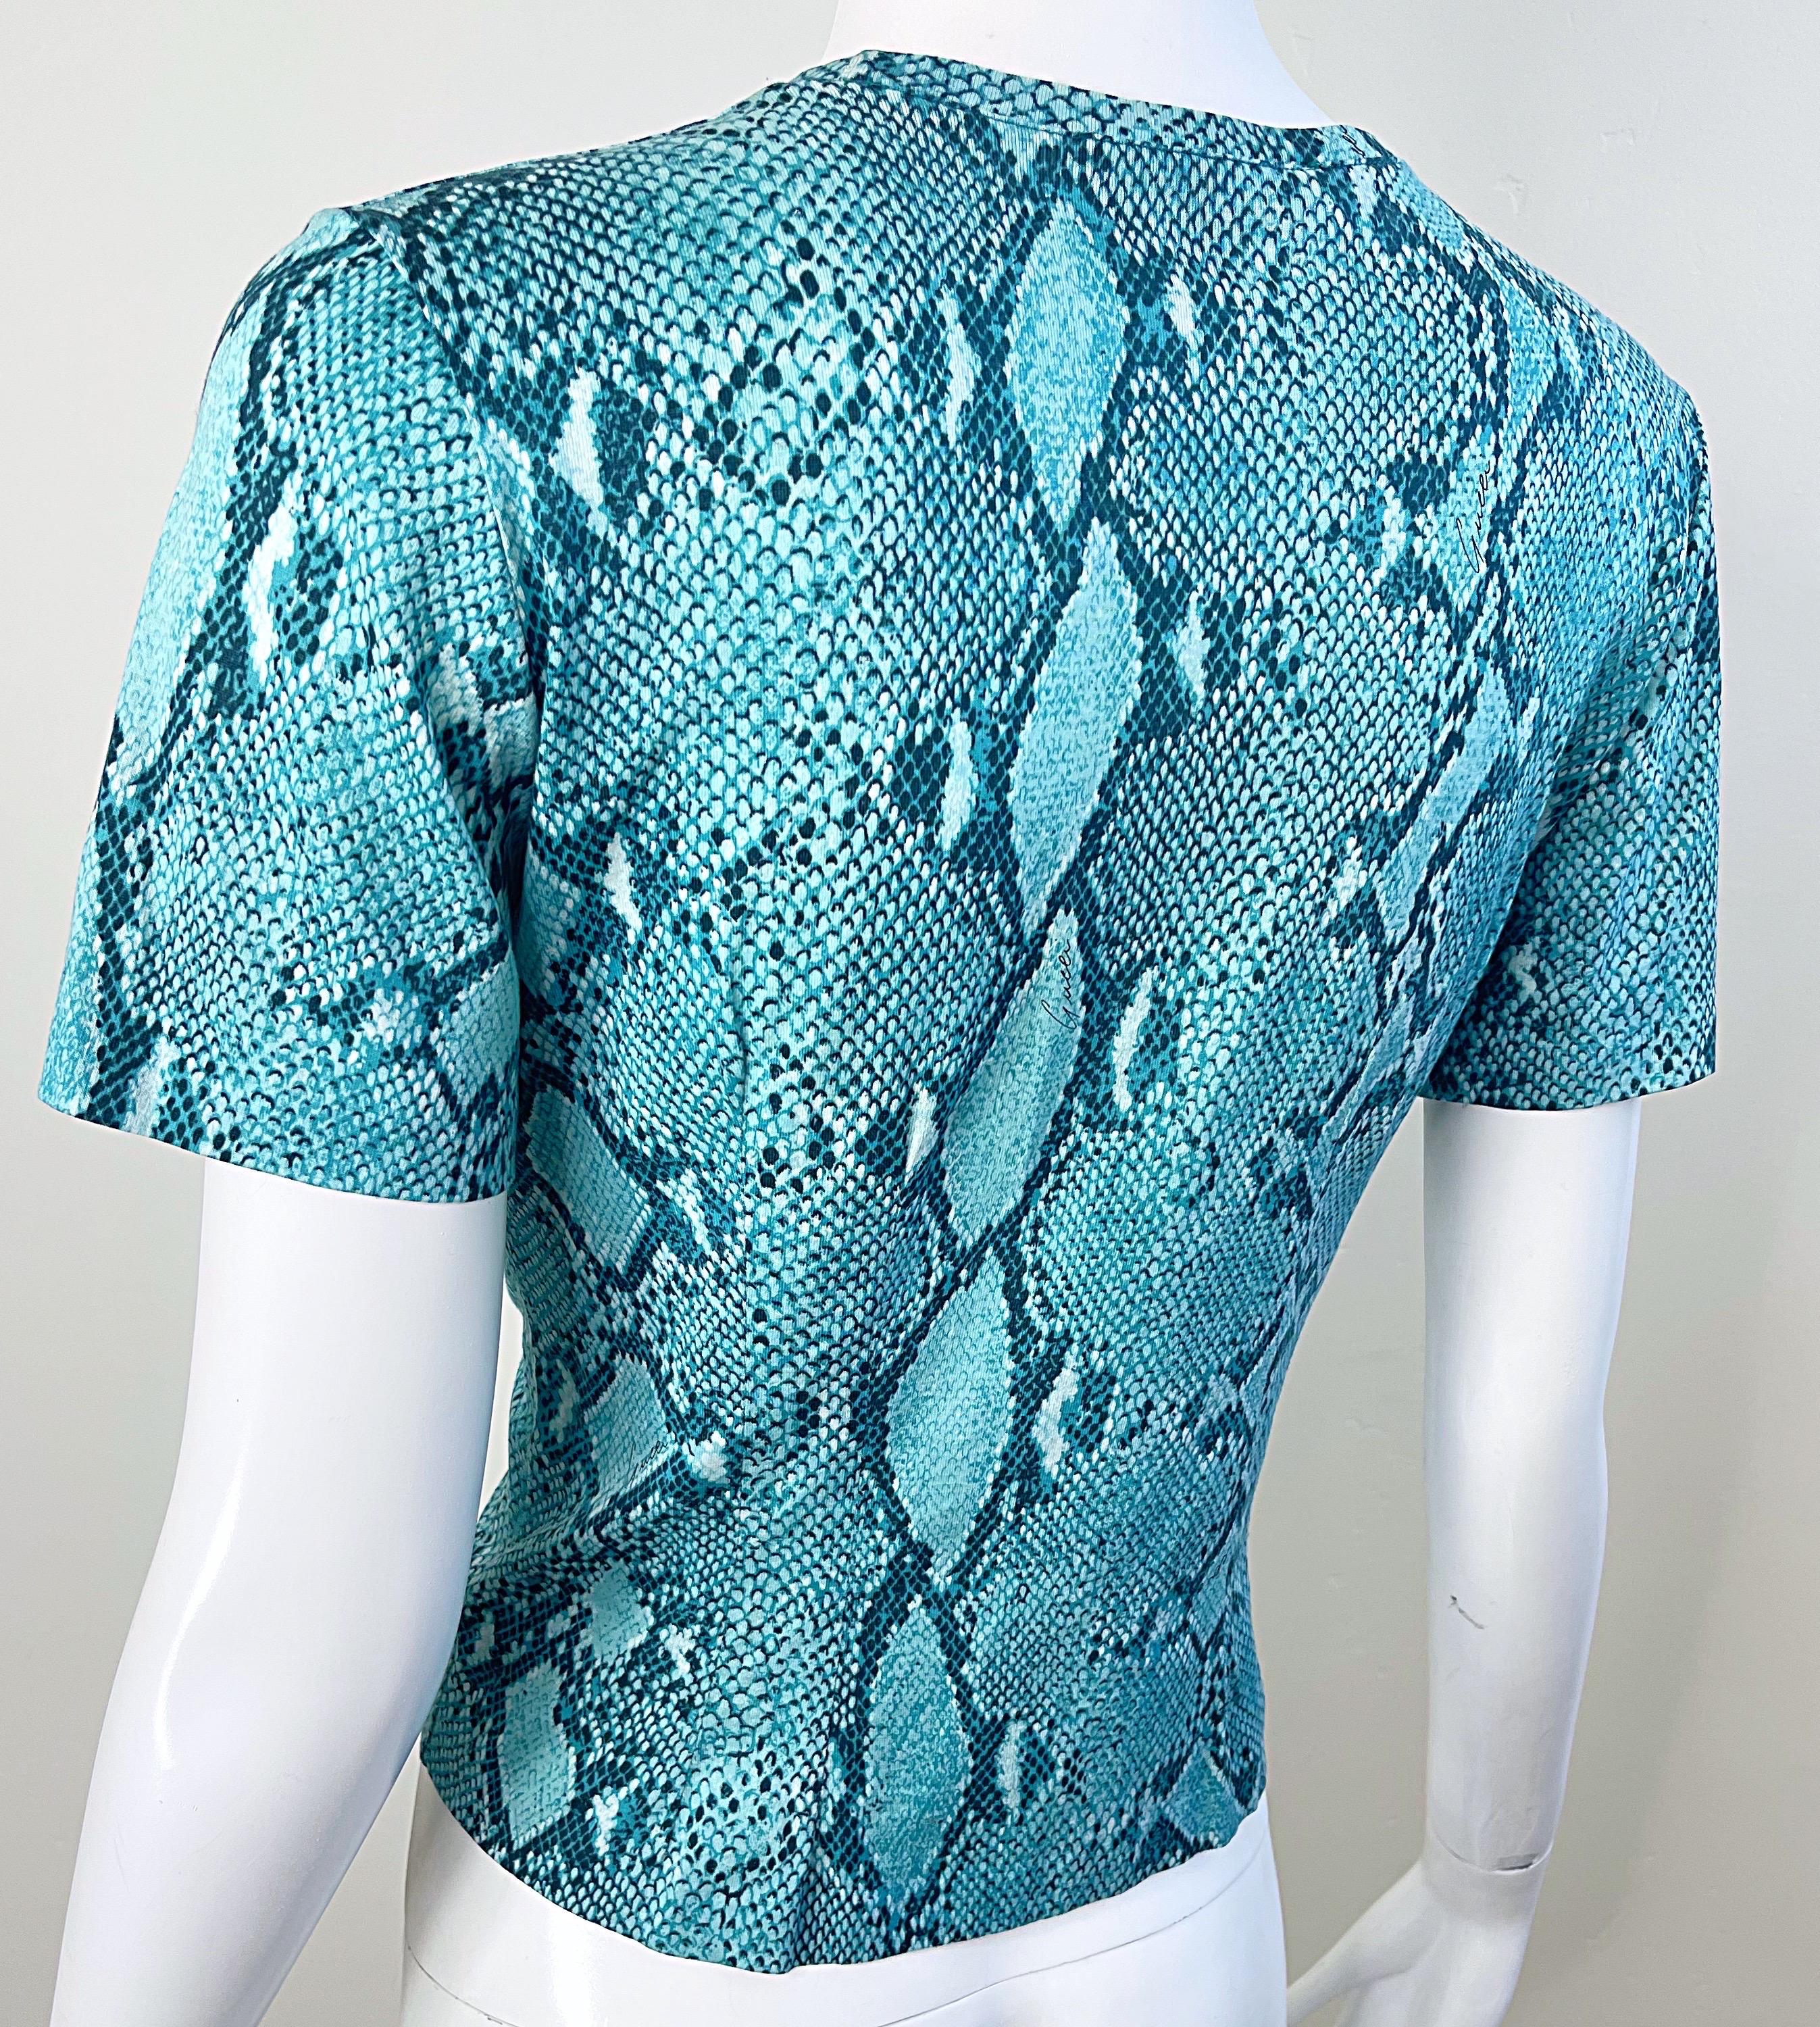 Gucci by Tom Ford Spring 2000 Turquoise Blue Snake Print Vintage Tee Shirt Y2K For Sale 2